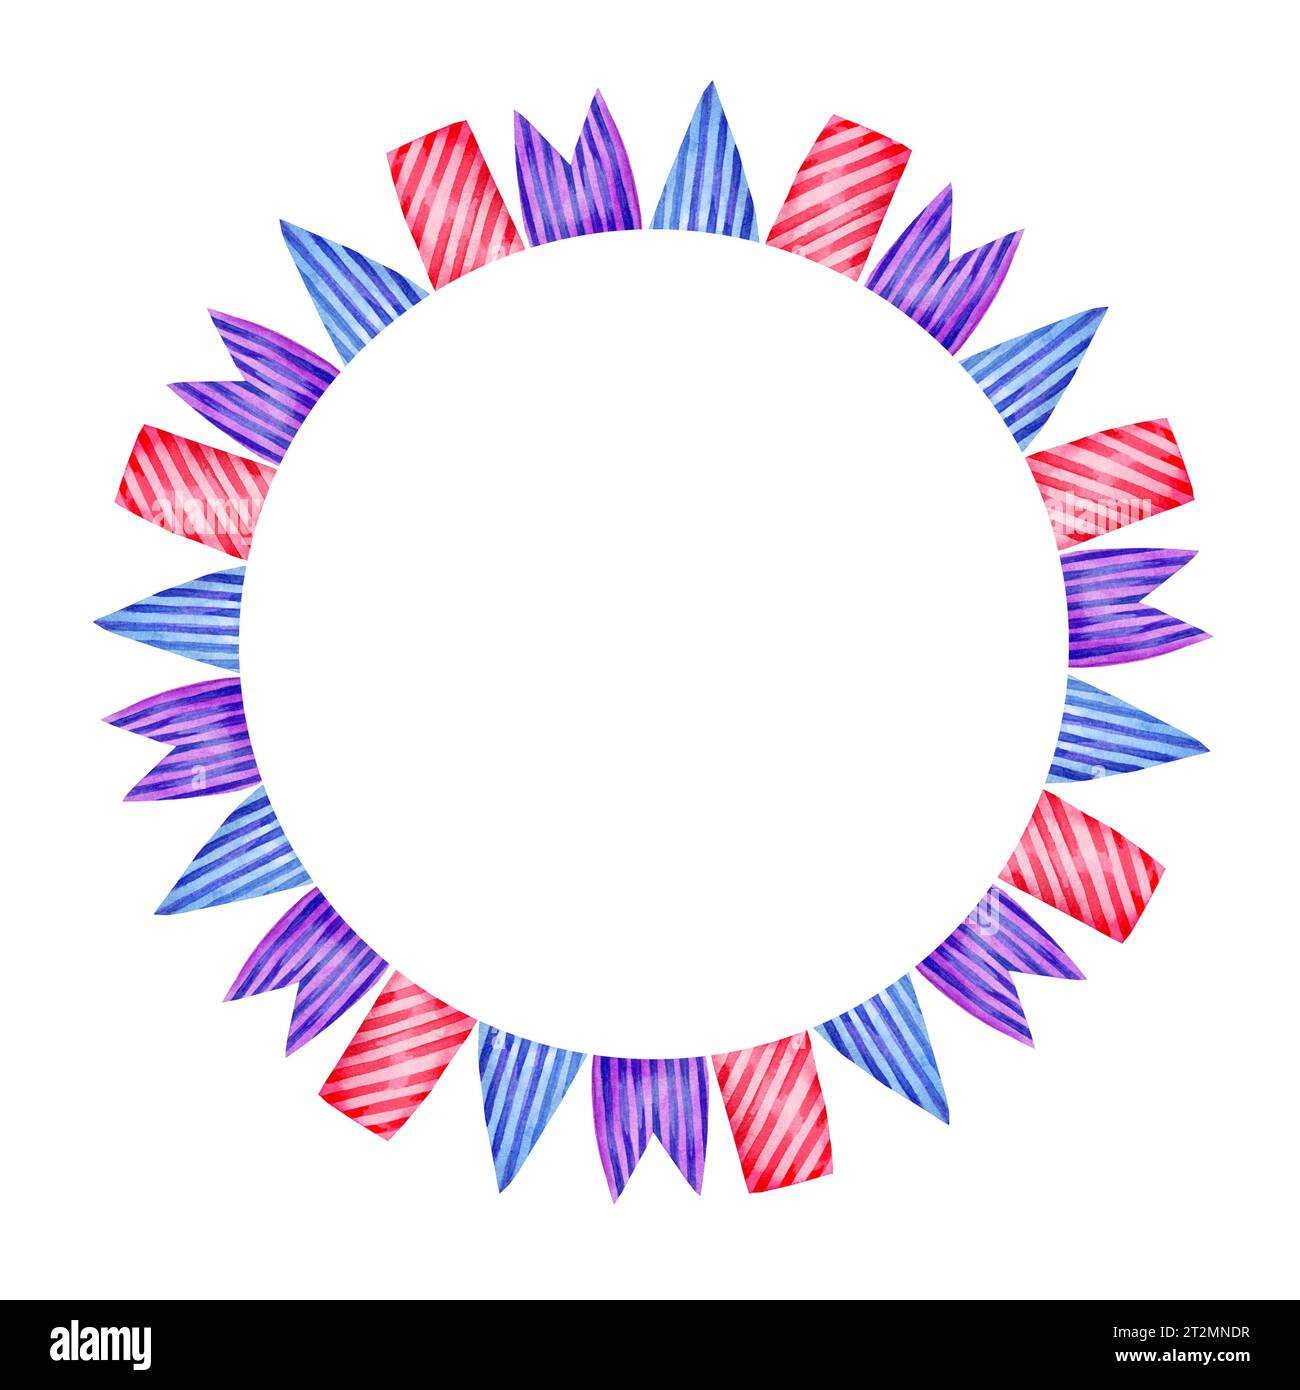 Watercolor round frame with different striped flags, hand drawn illustration of garland of blue, magenta, purple flags isolated on white background. D Stock Photo